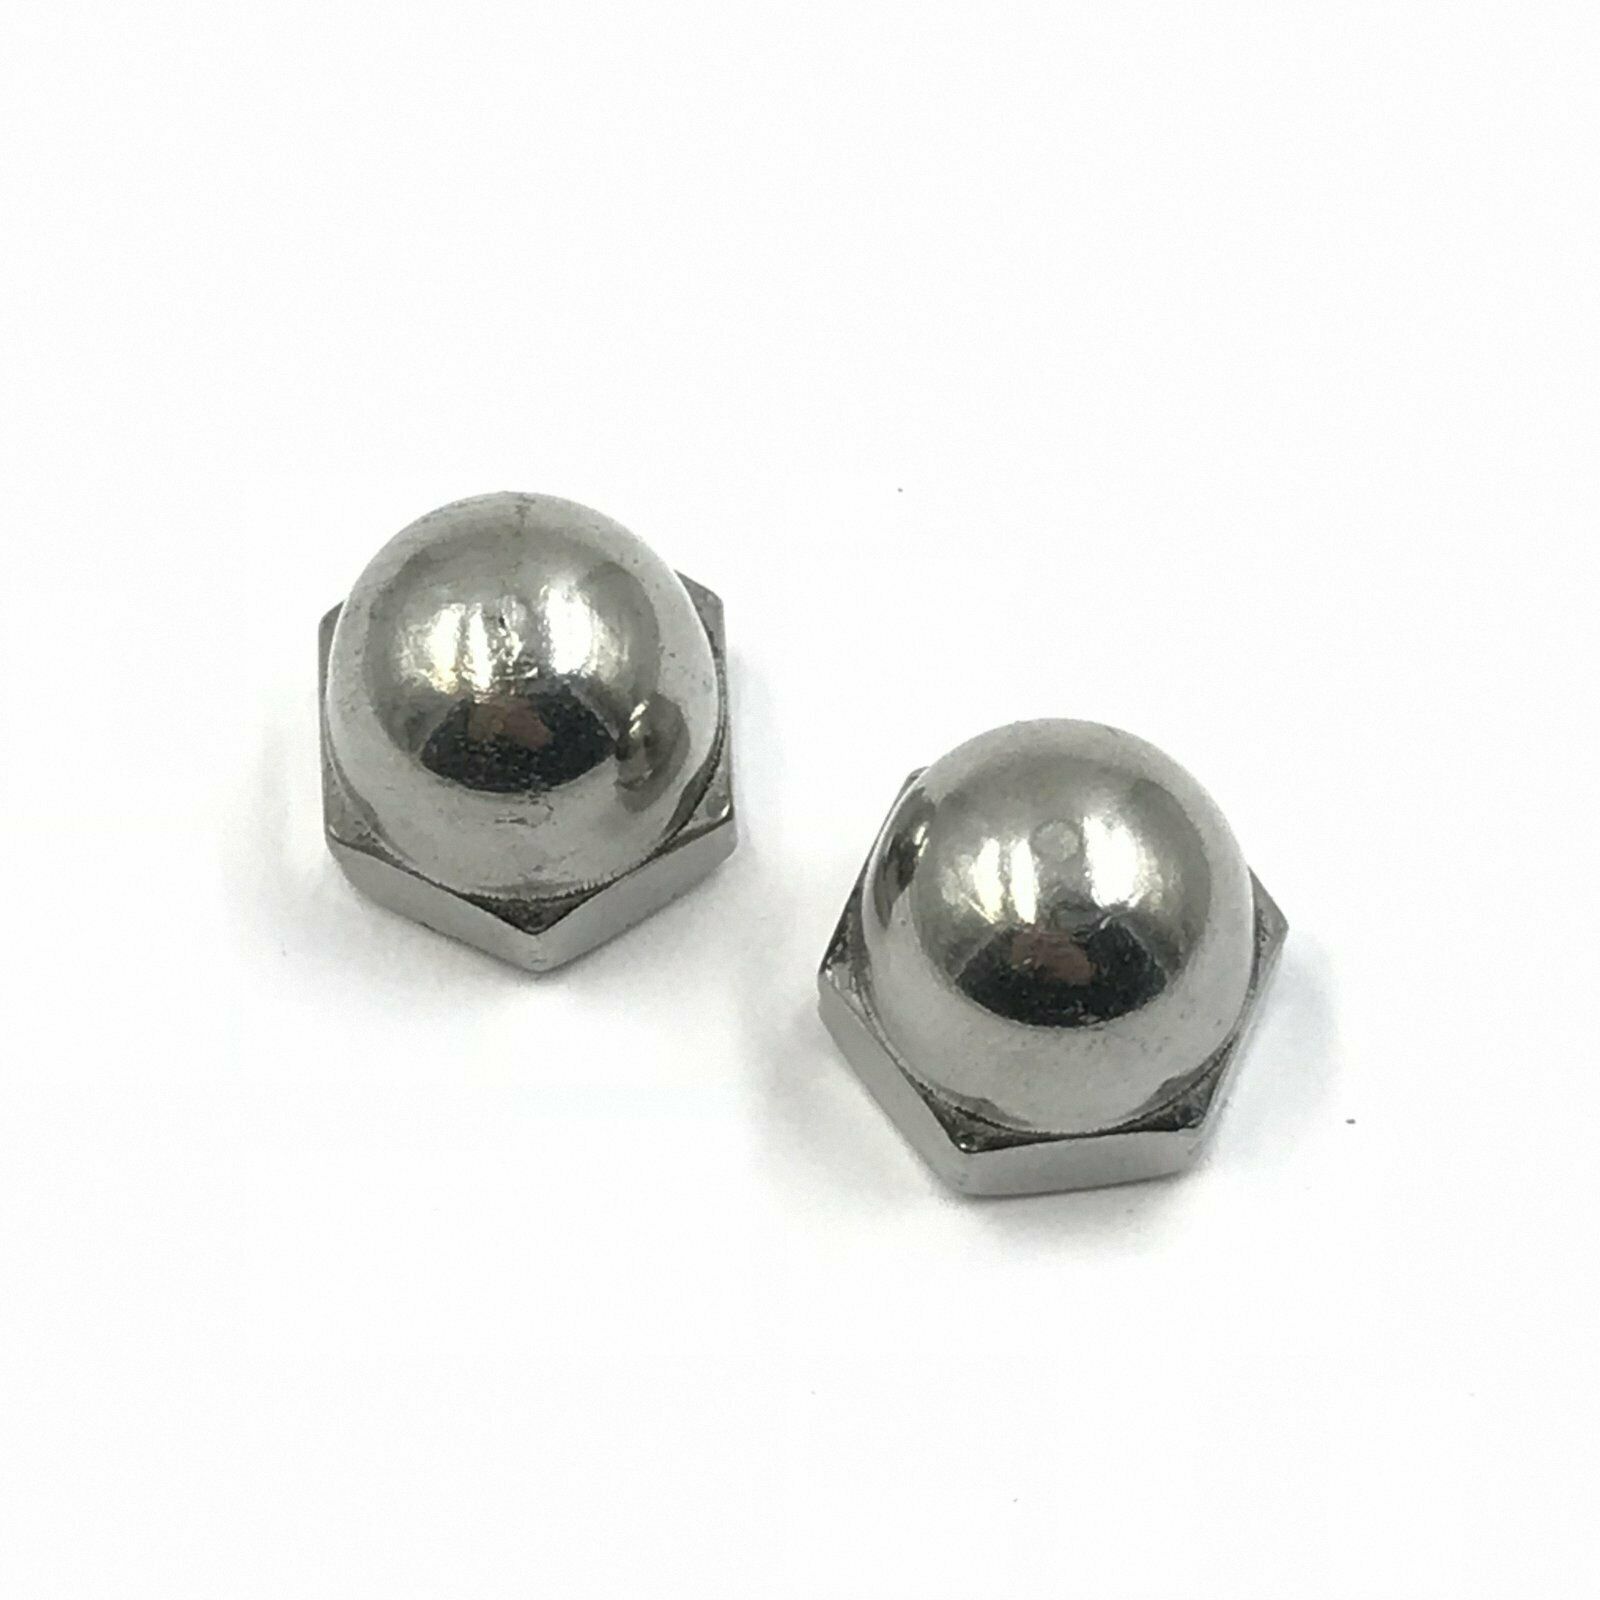 New 12Pcs M8 x 1.25 Stainless Steel Acorn Hex Nut Right Hand Thread [M1]